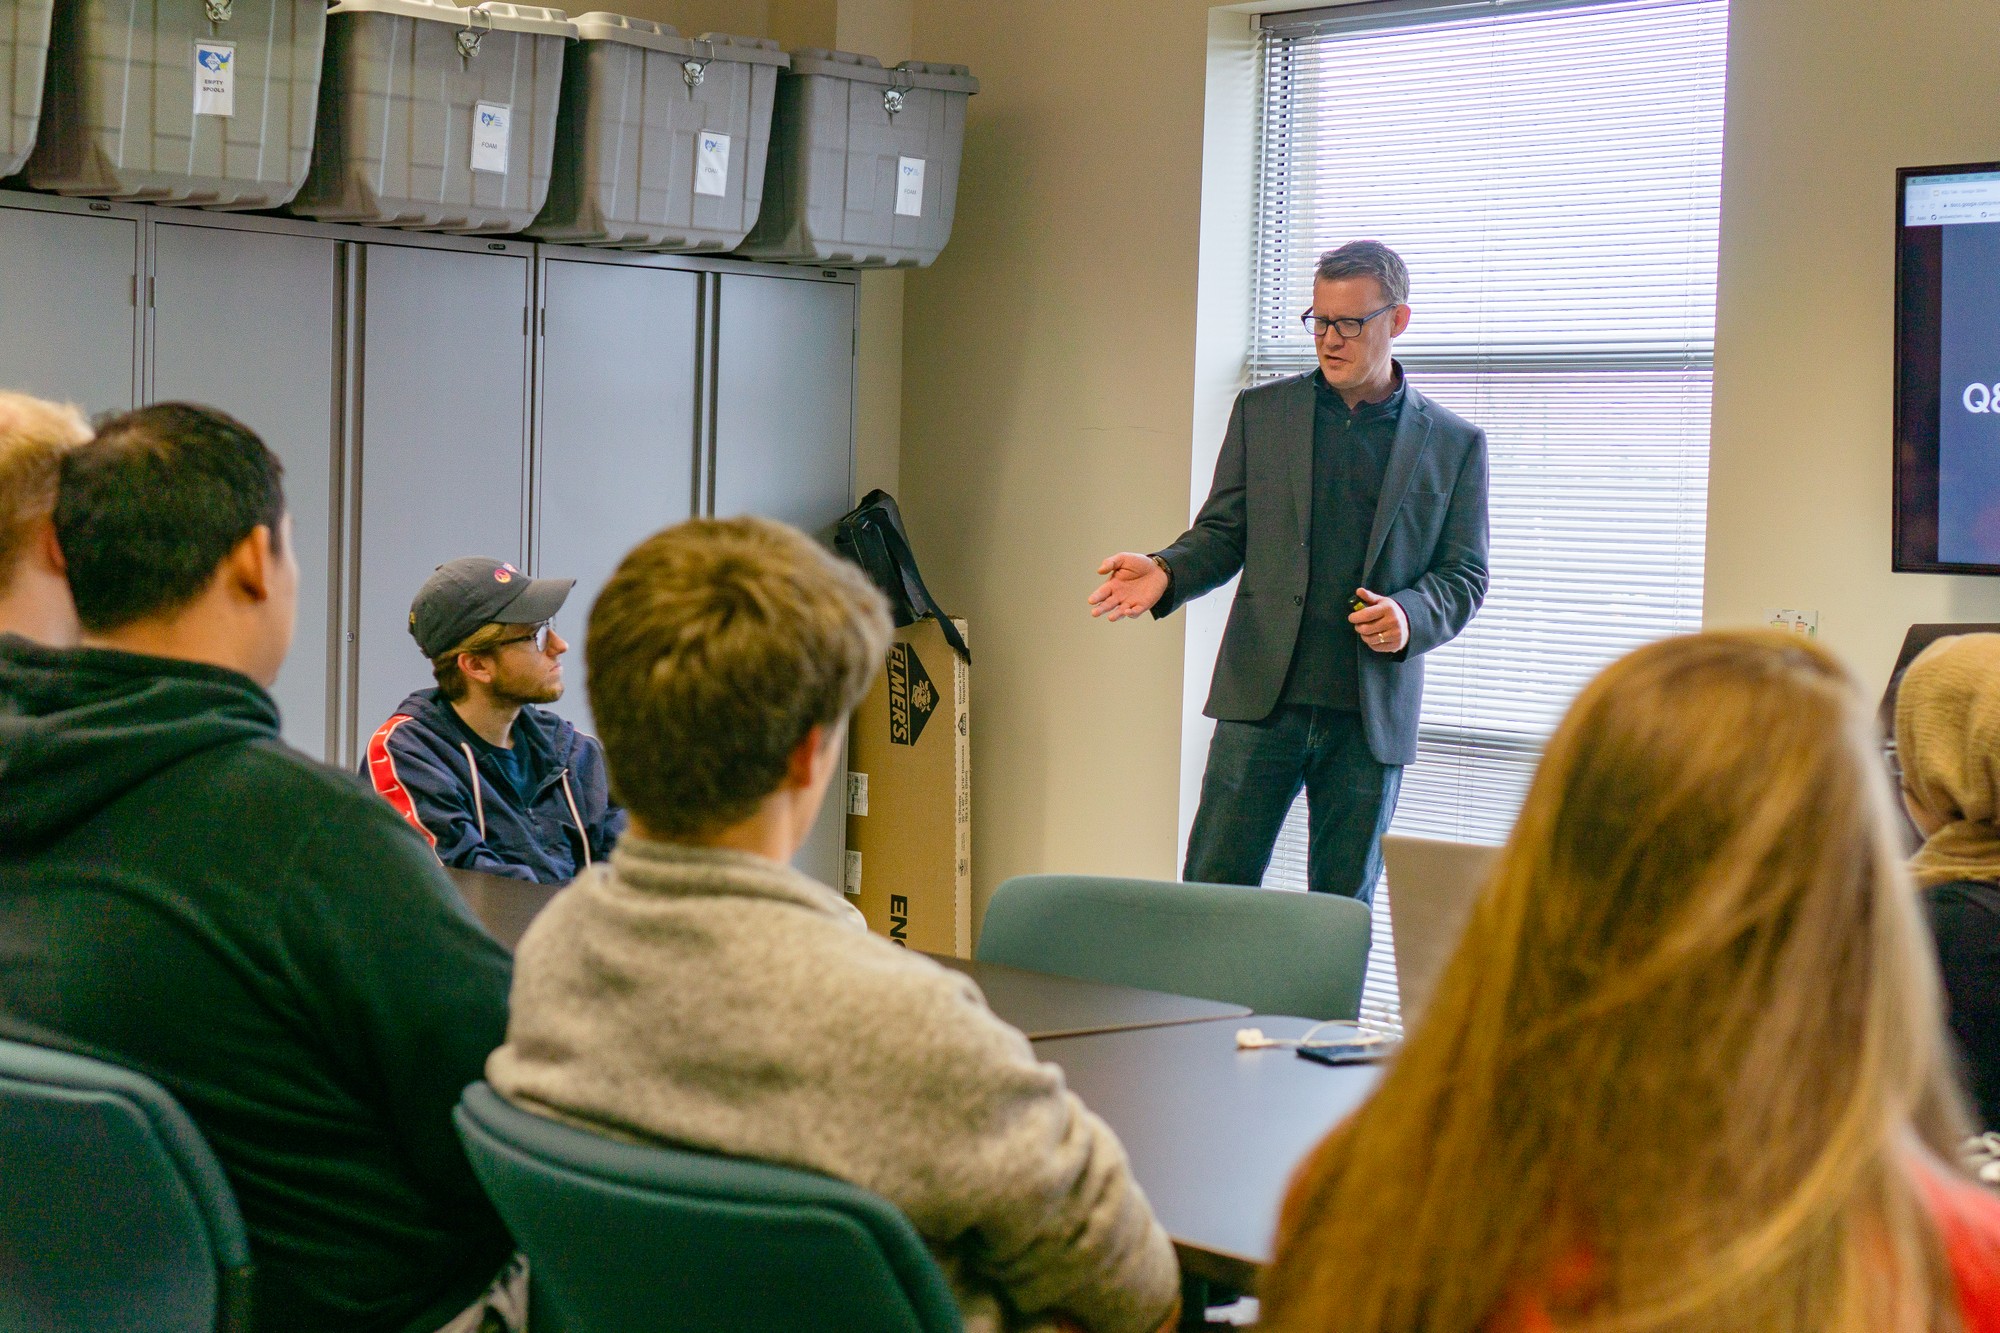 Information Systems professional shares seasoned wisdom with students